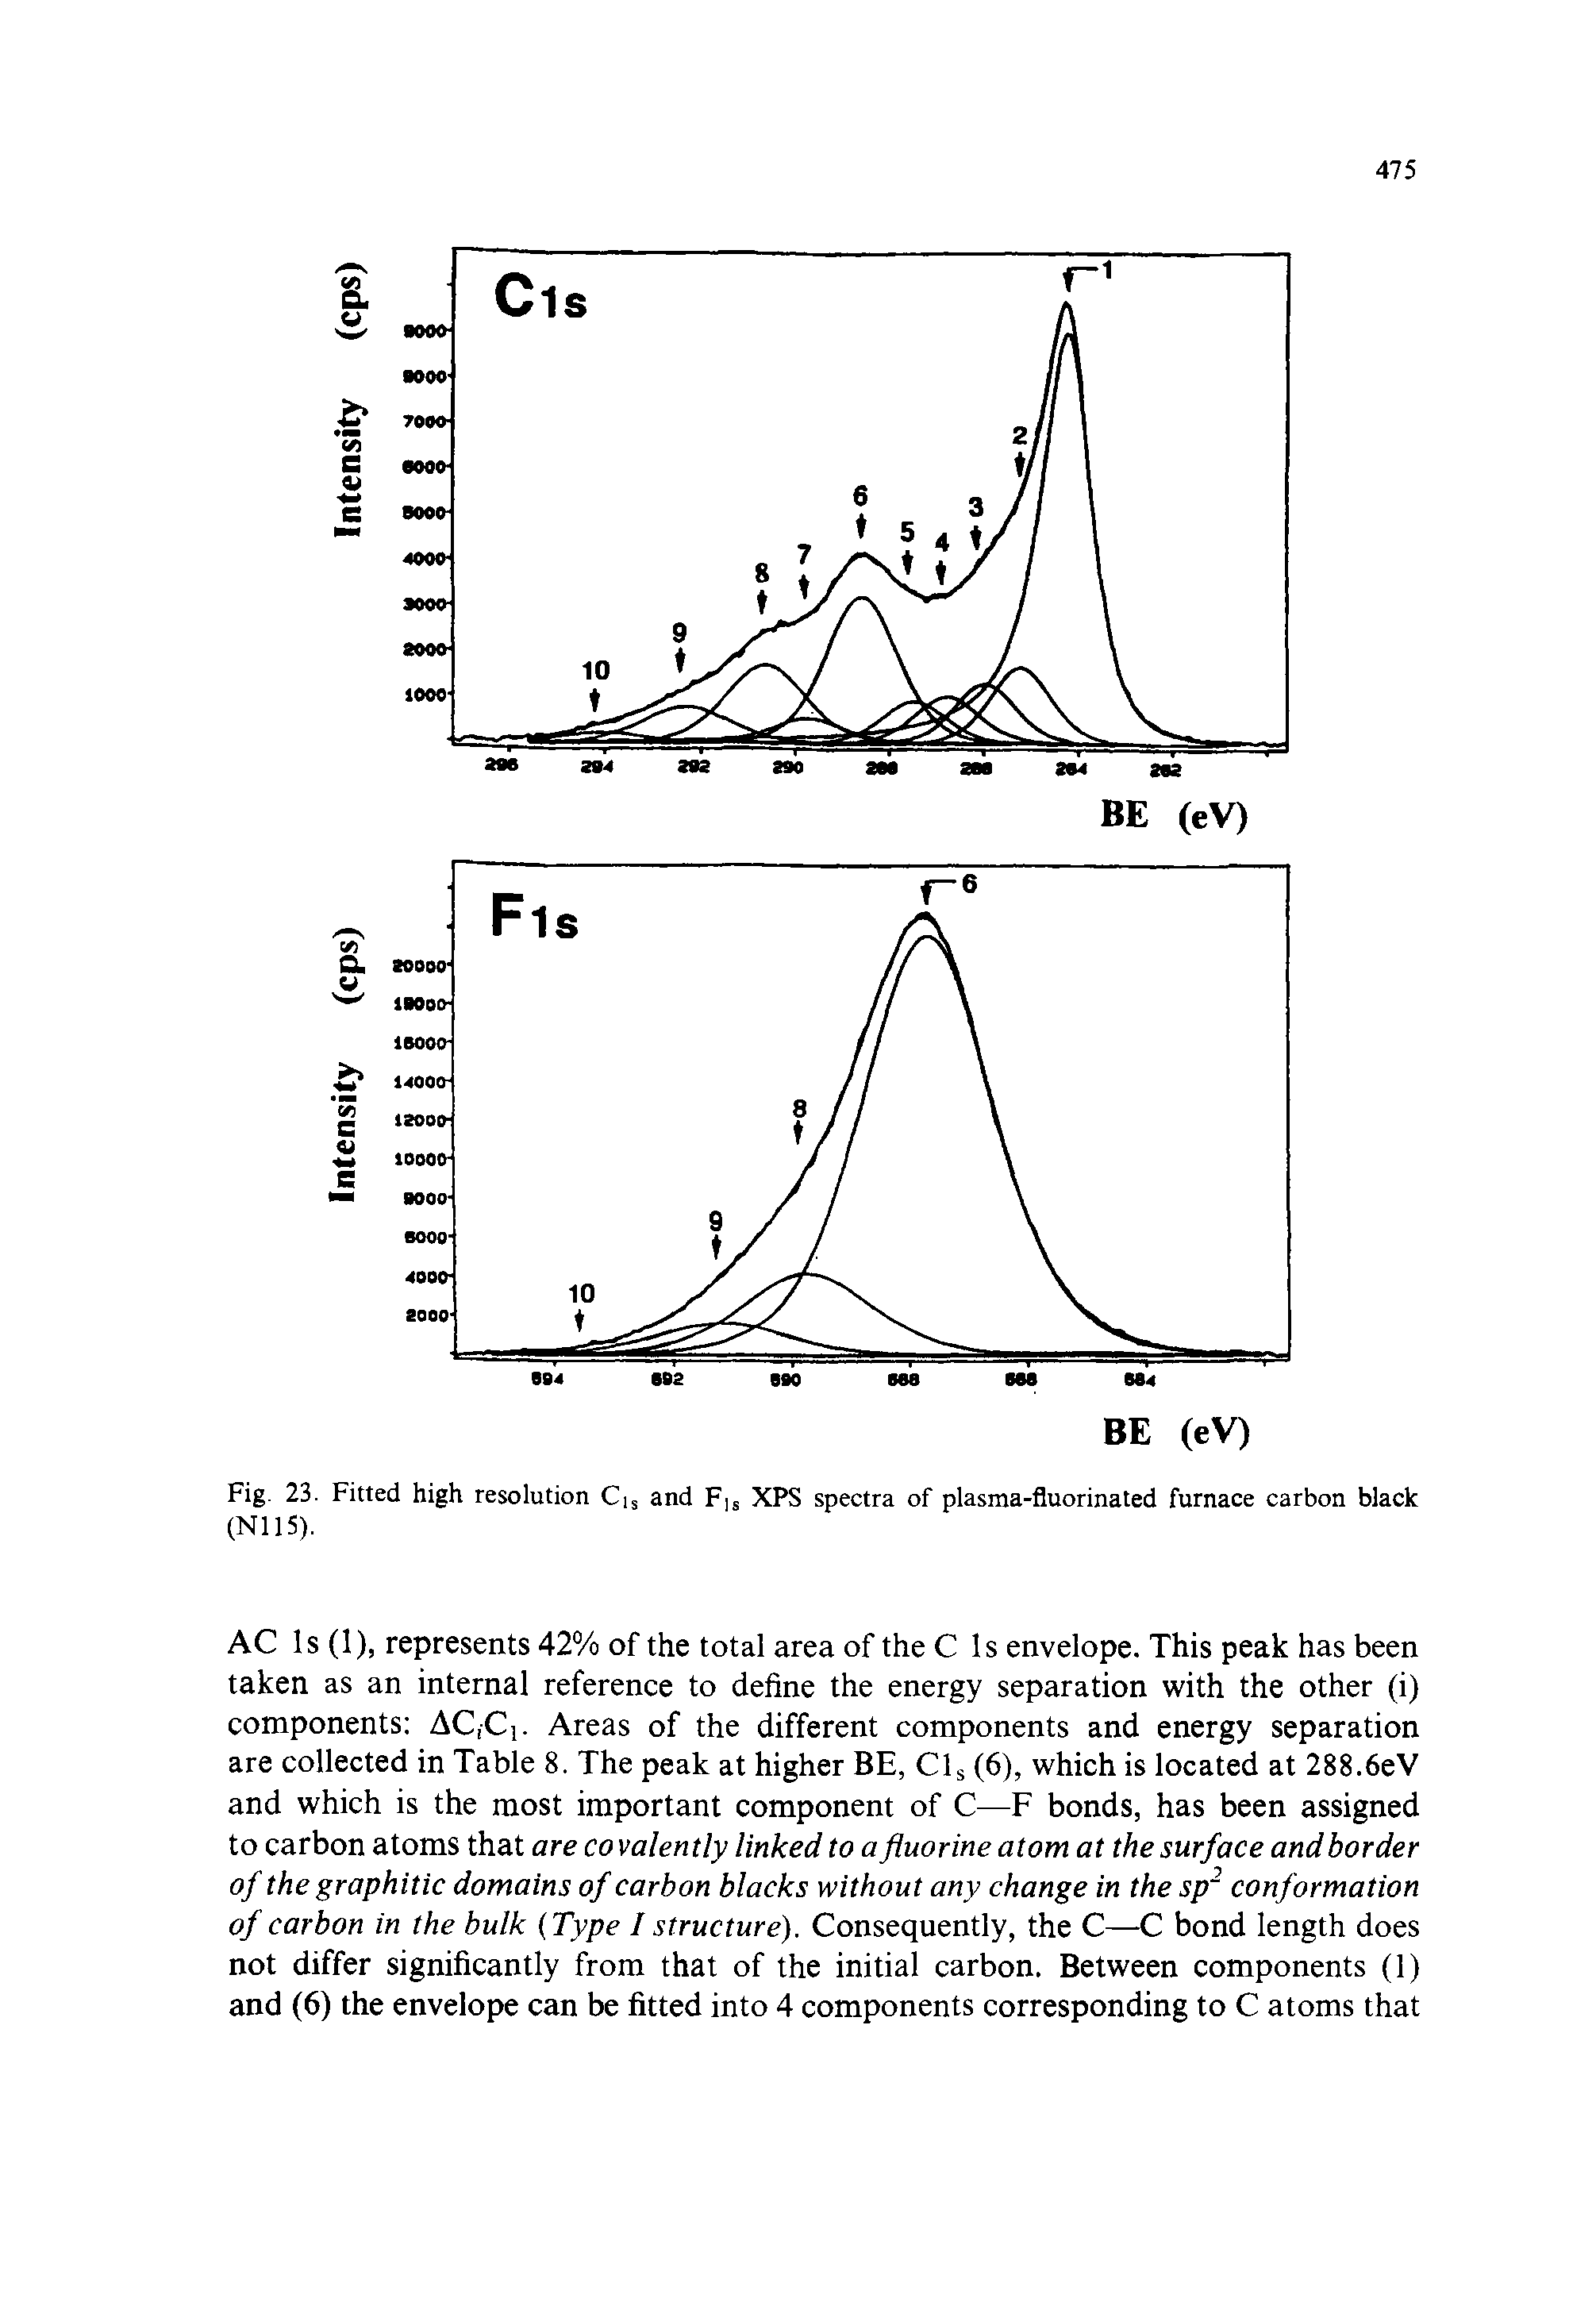 Fig. 23. Fitted high resolution Cis and F]s XPS spectra of plasma-fluorinated furnace carbon black (Nil 5).